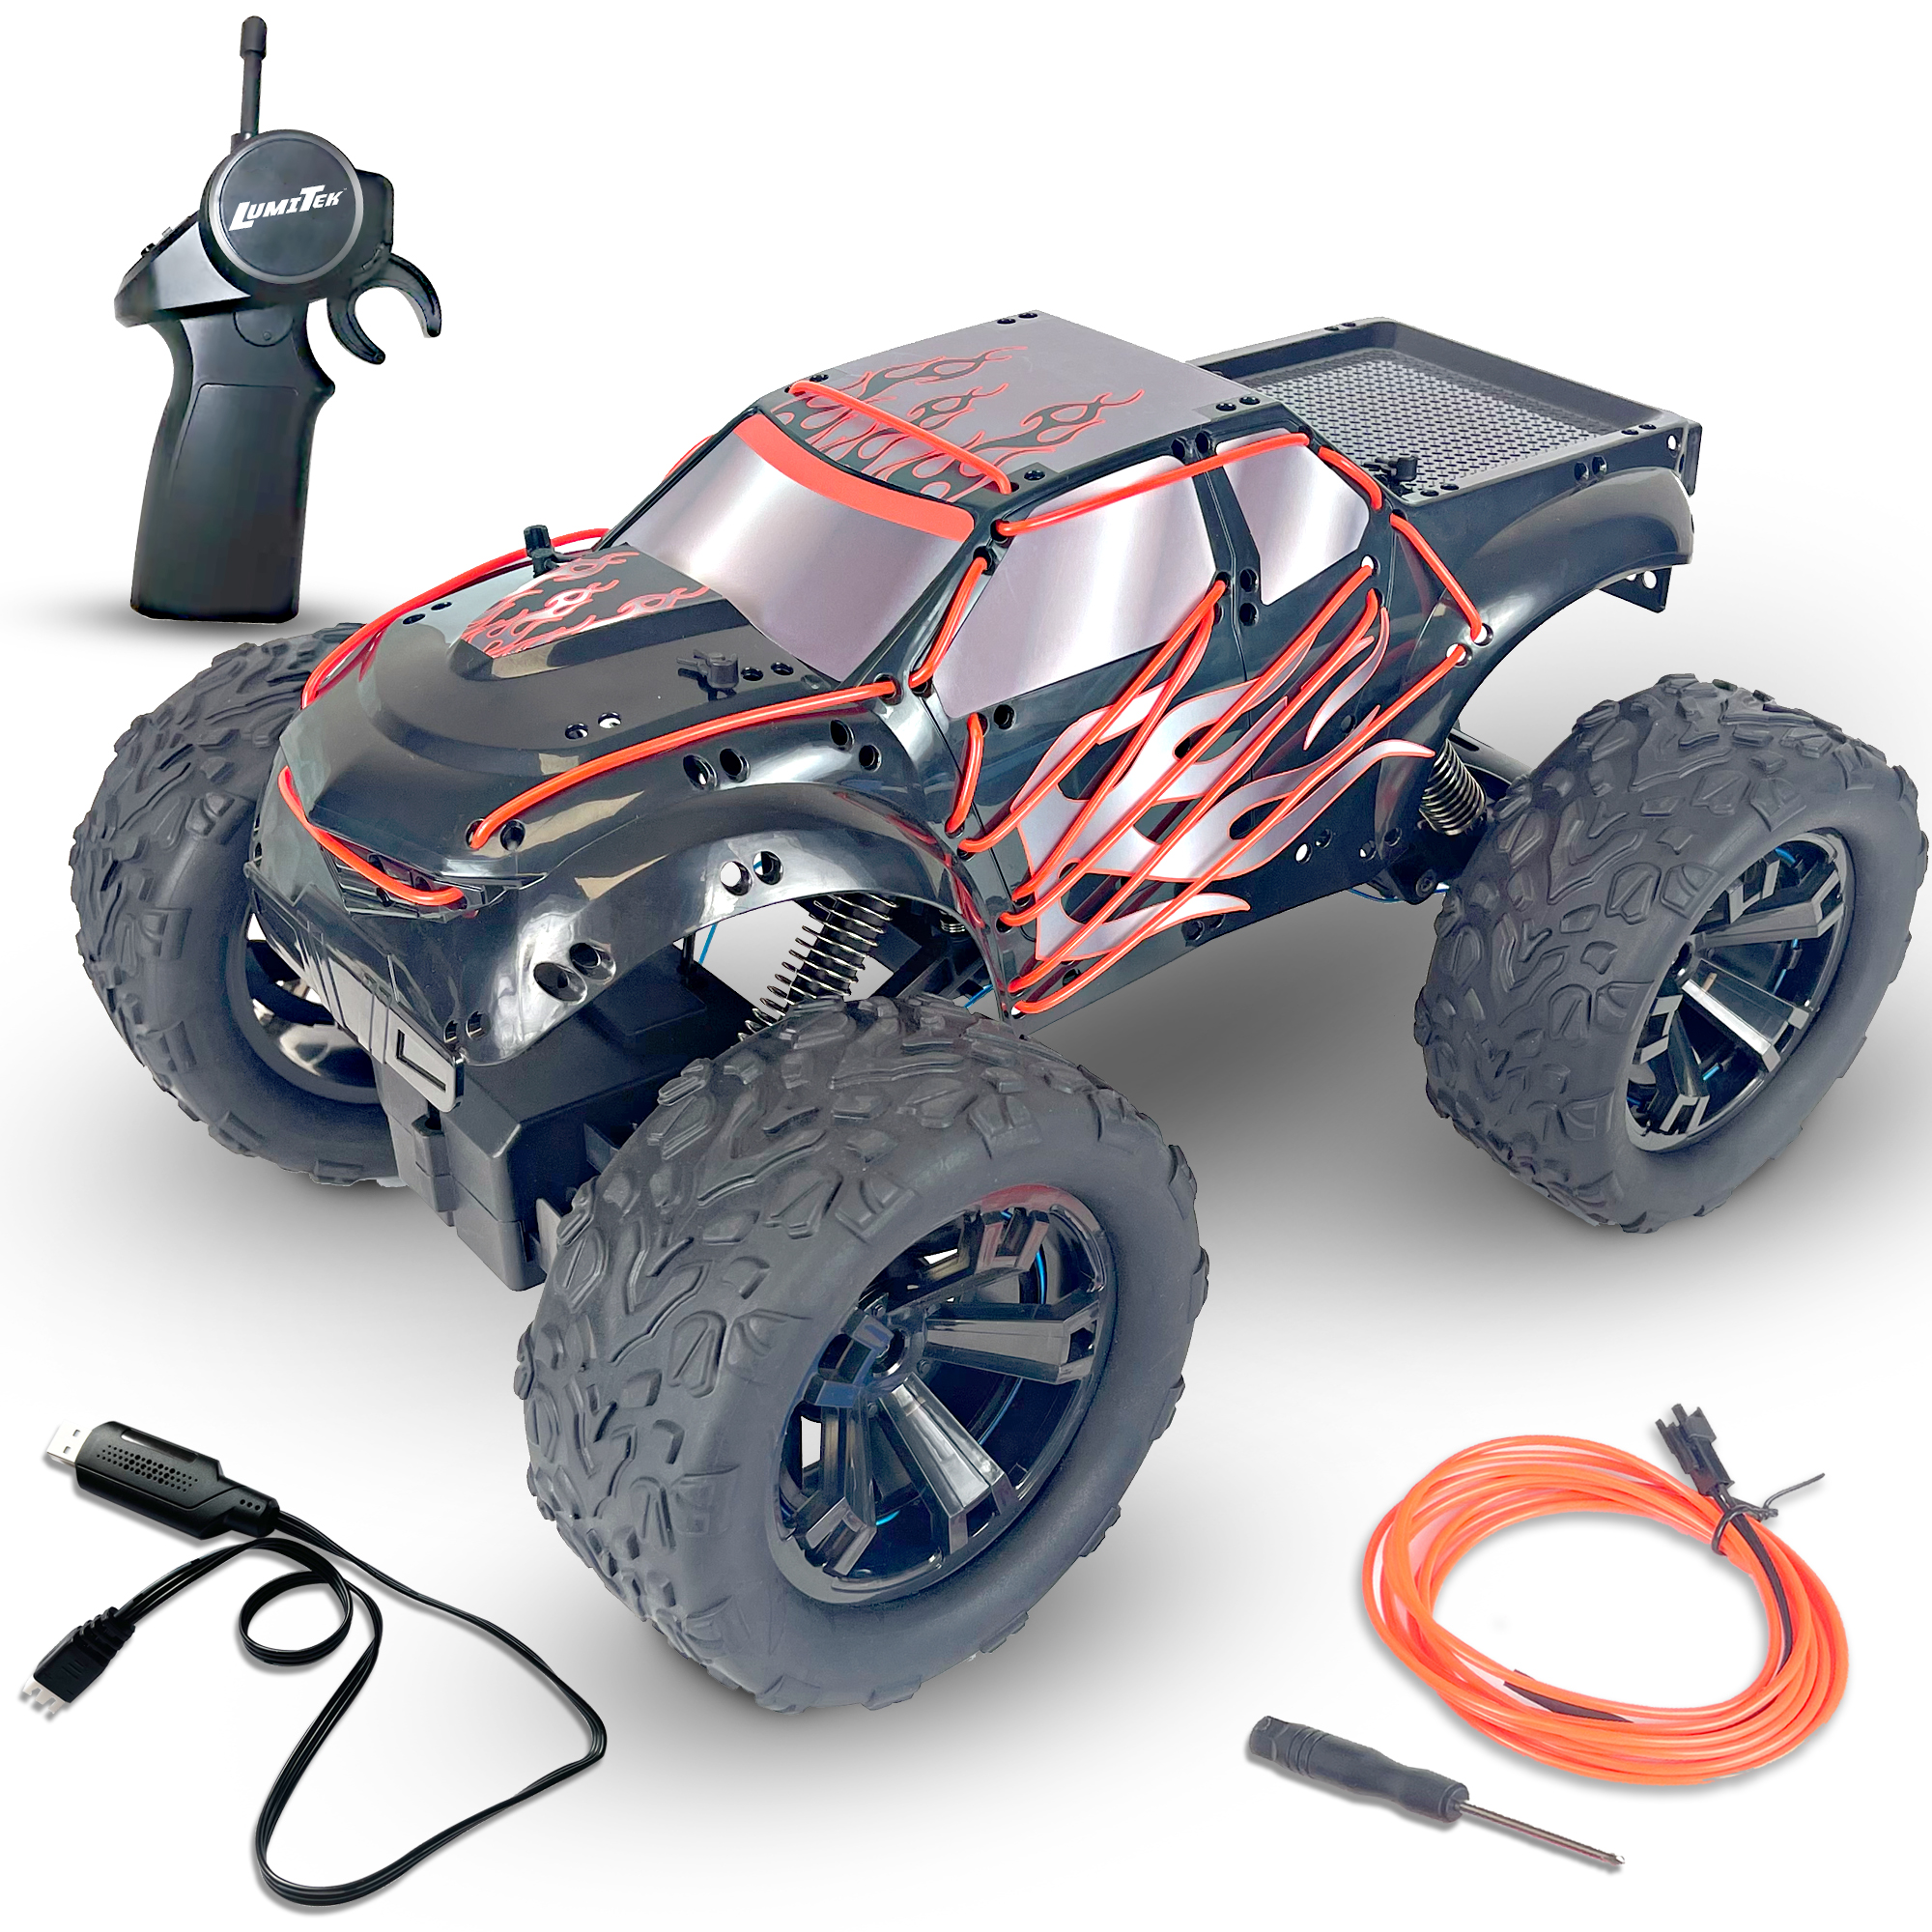 LumiTEK™ R/C - Neon Giant Truck - Customizable LED Piping- 2.4 GHz 1:10 Scale Remote Control Car - Ages 8+ - image 1 of 7